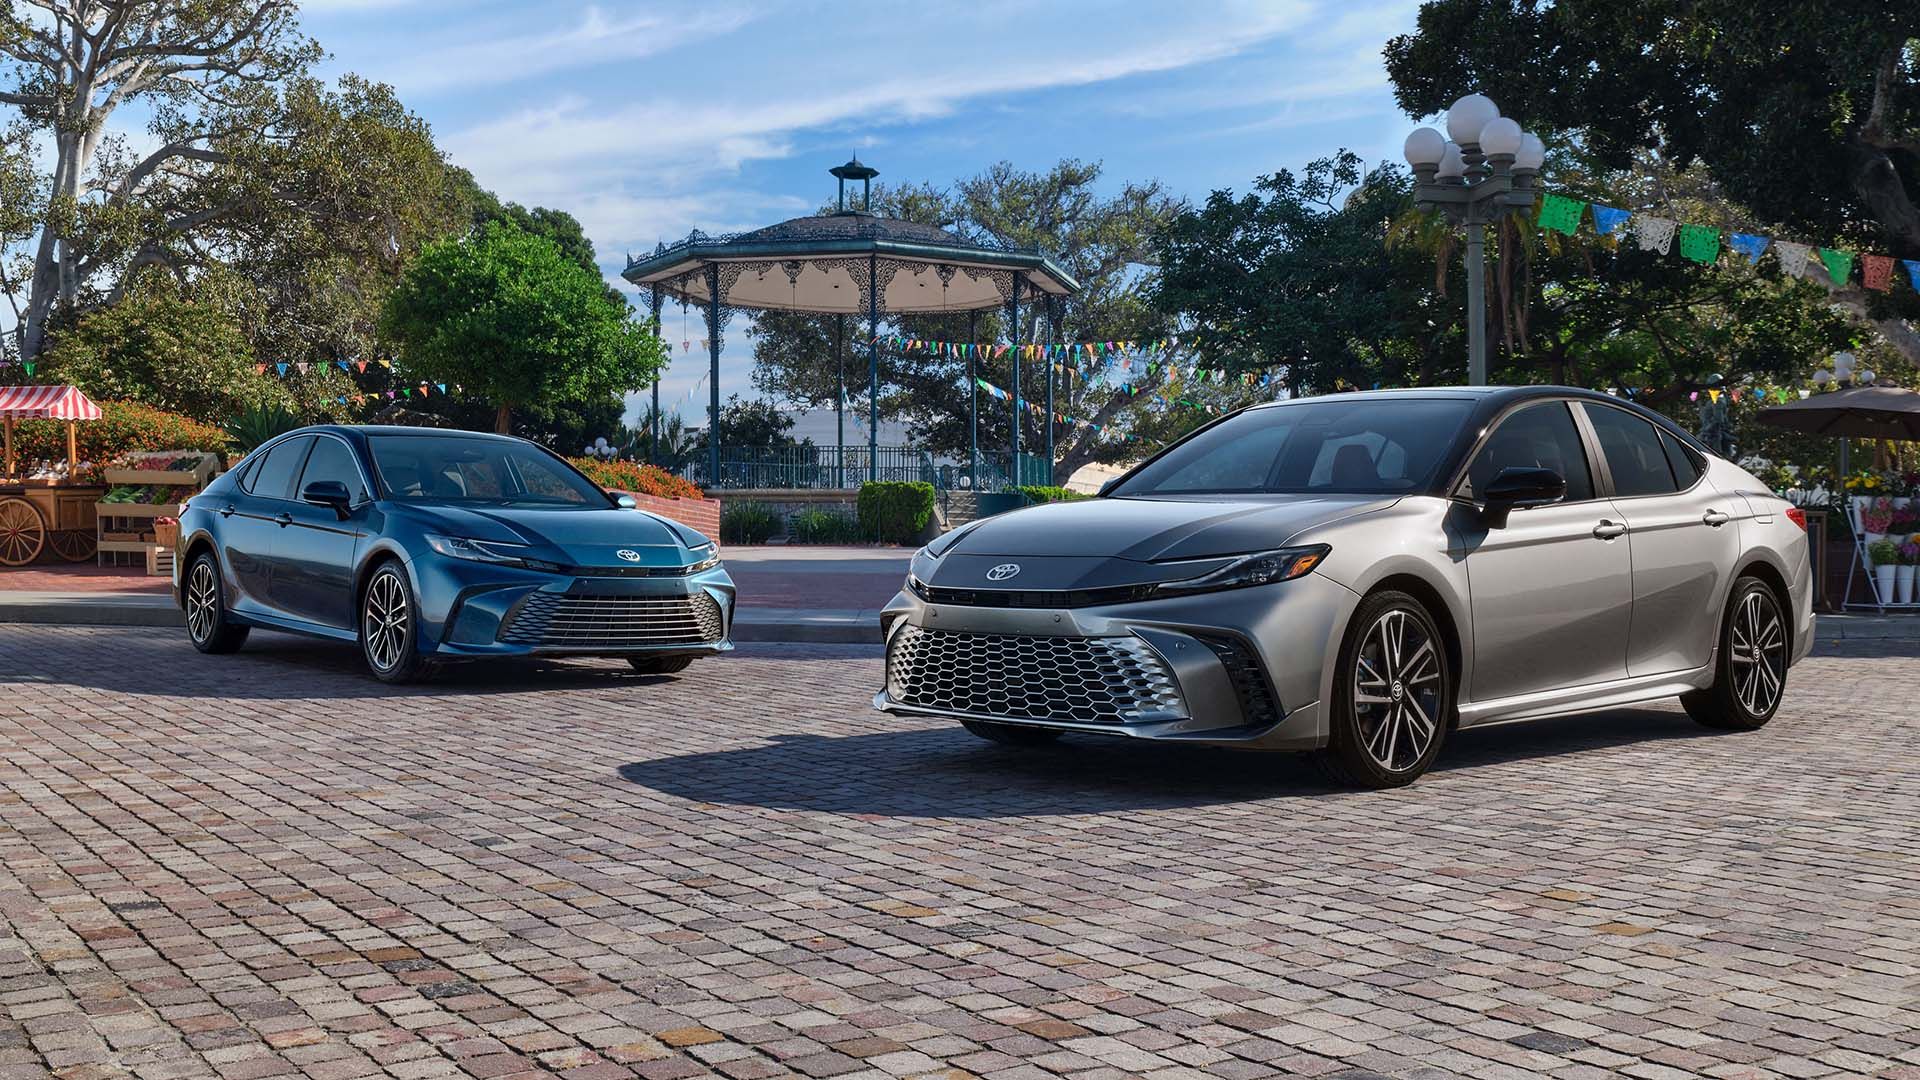 A group shot of the 2025 Toyota Camry XLE on the left and XSE on the right